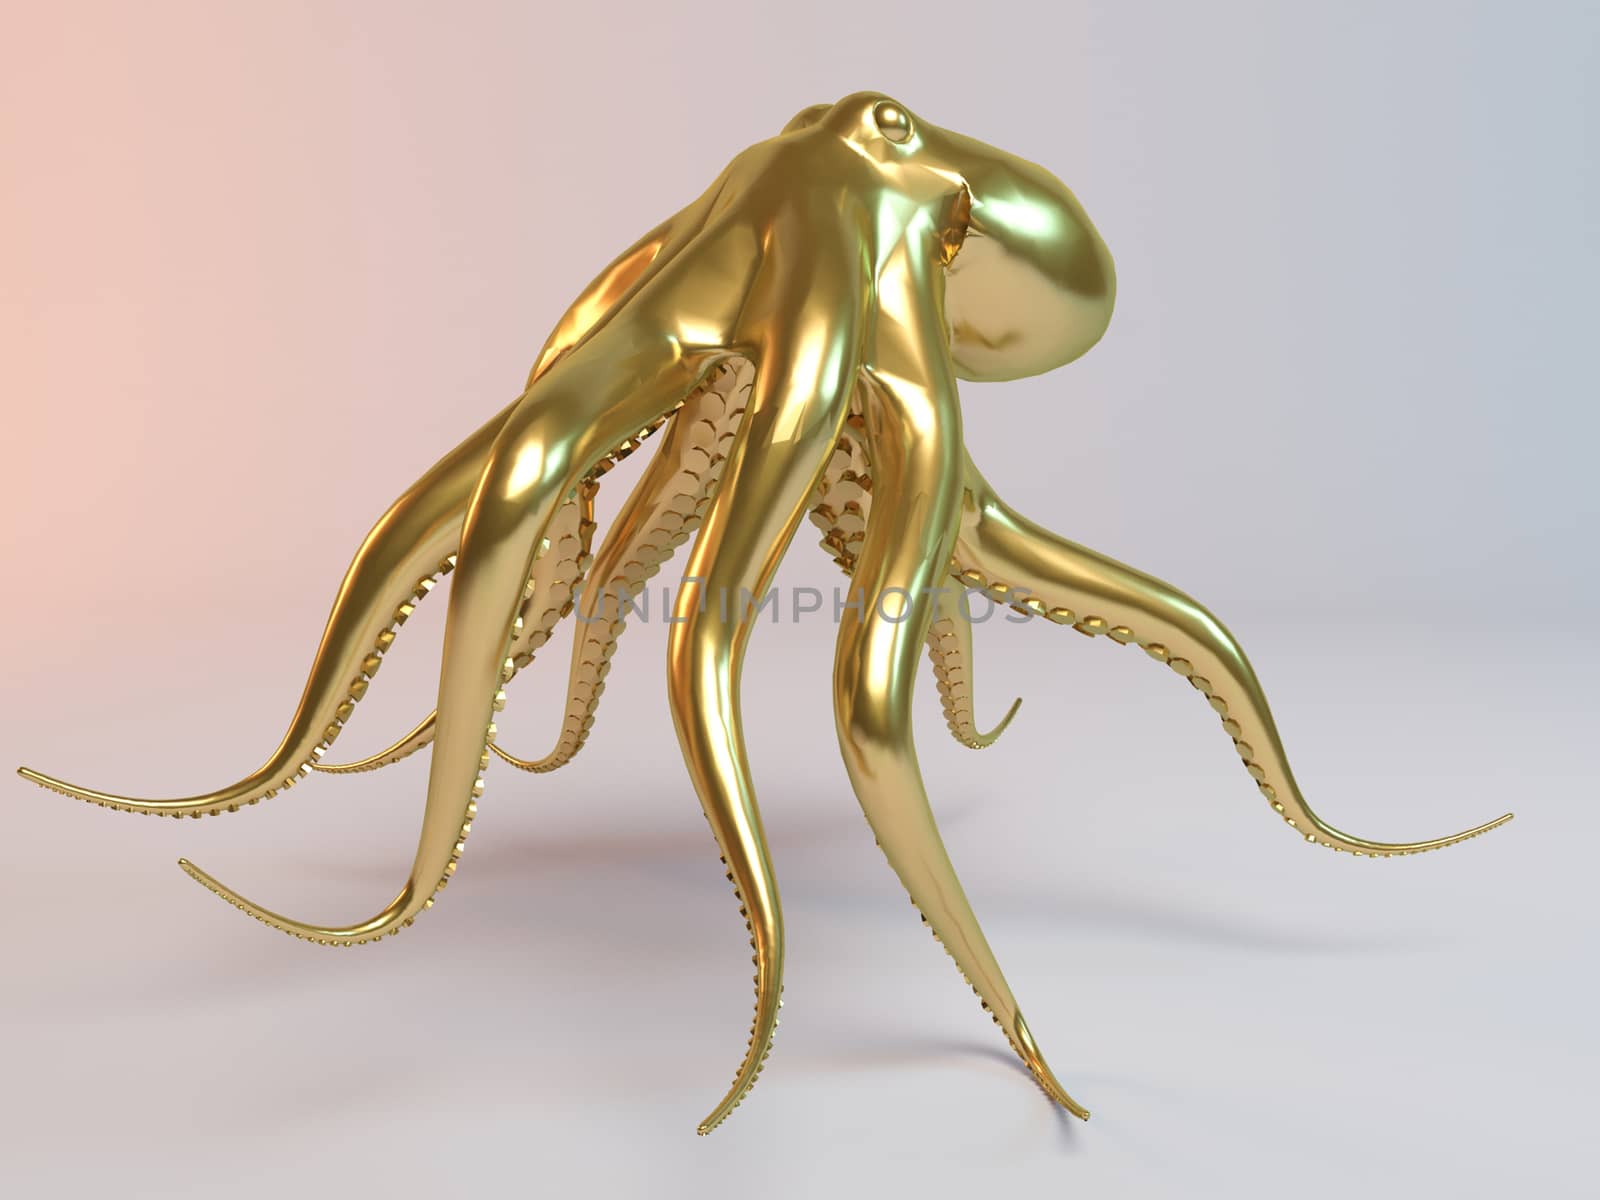 Golden 3D animal octopus inside a stage with high render quality to be used as a logo, medal, symbol, shape, emblem, icon, business, geometric, label or any other use